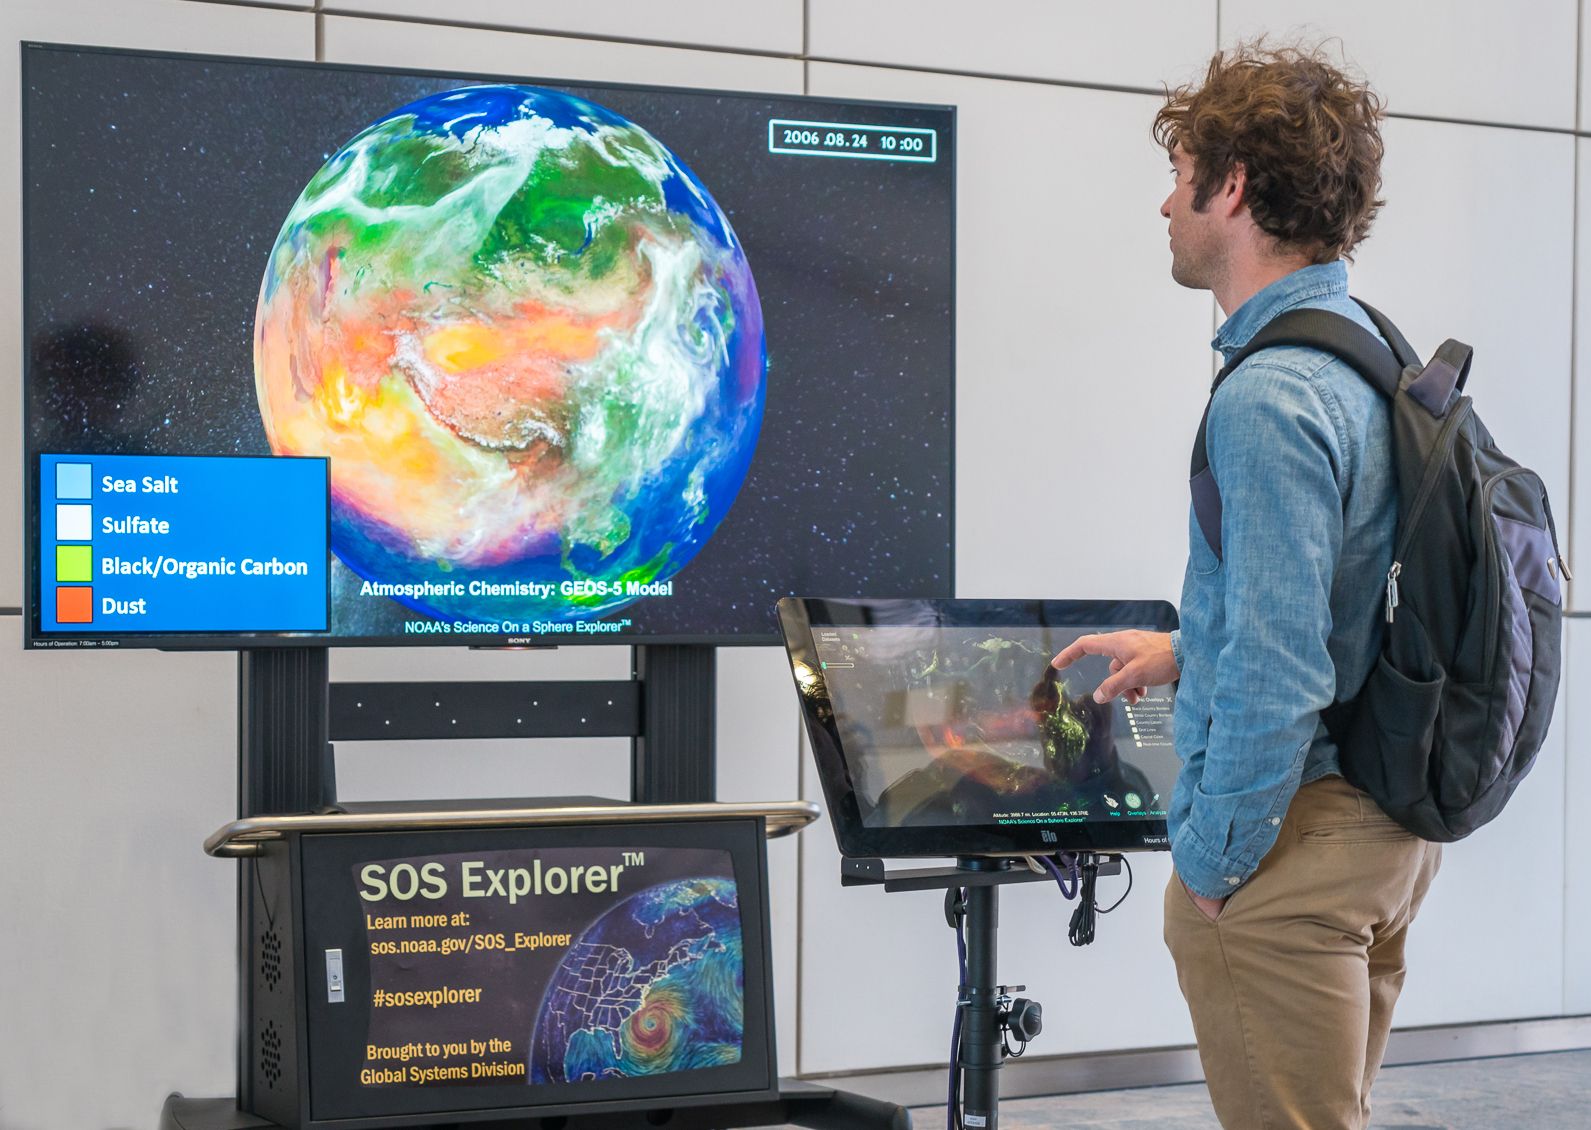 A person touches a smaller screen and controls a larger screen displaying
     atmospheric chemistry on SOS Explorer.